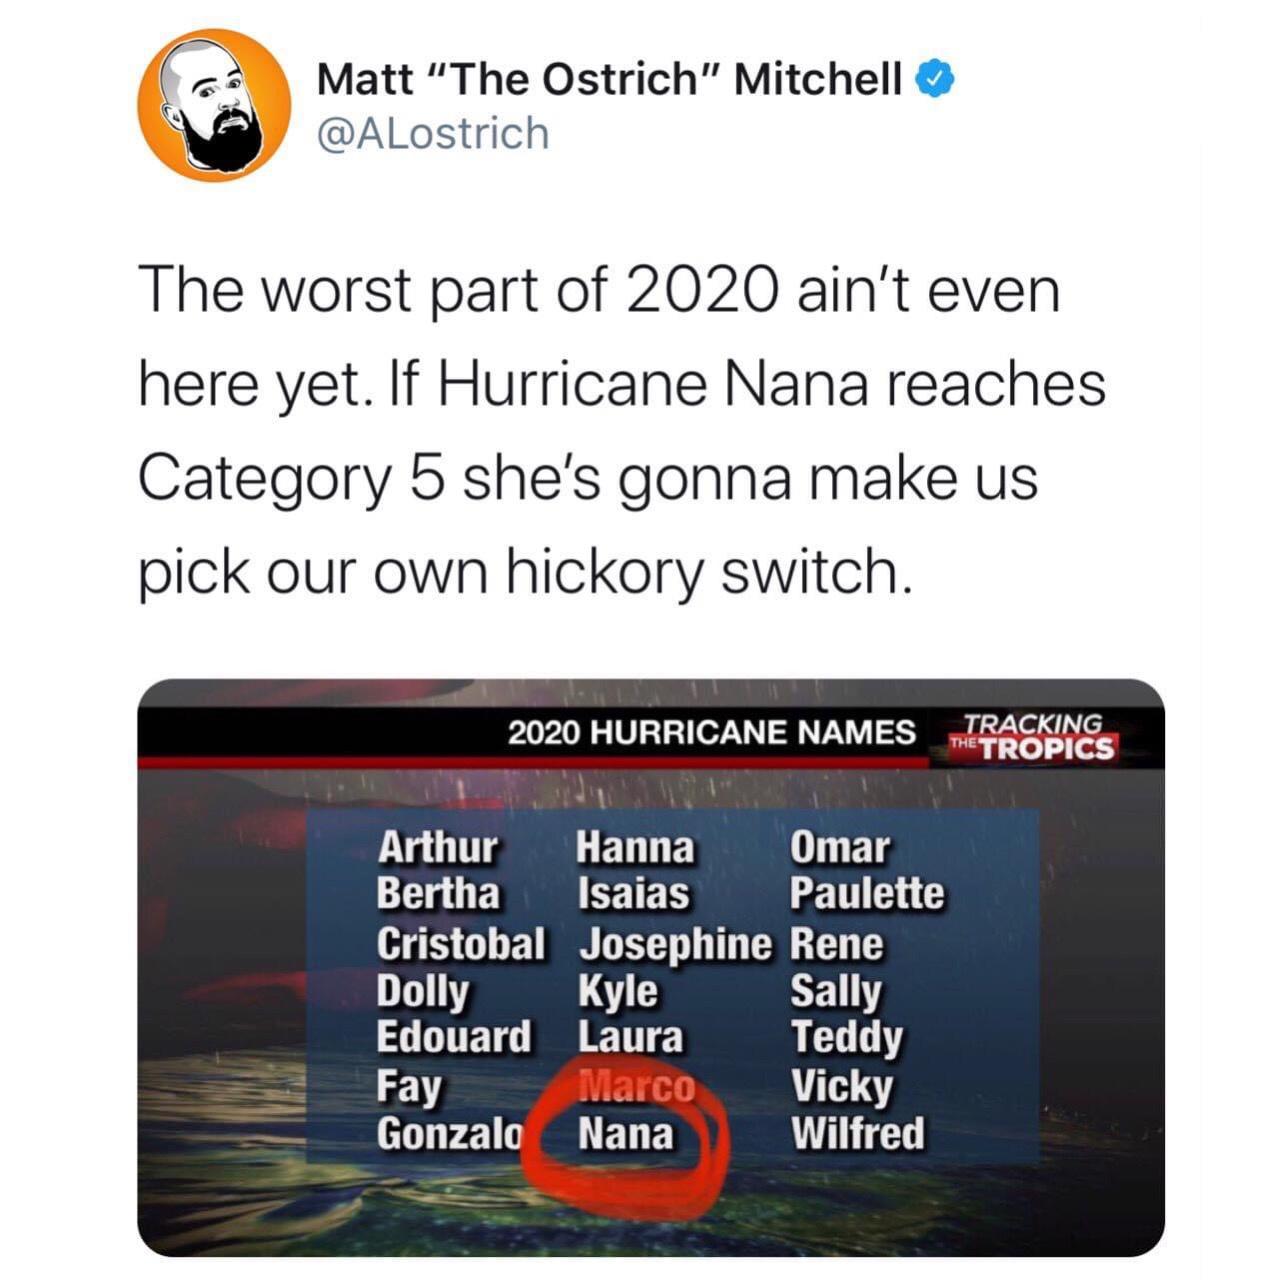 media - Matt "The Ostrich" Mitchell The worst part of 2020 ain't even here yet. If Hurricane Nana reaches Category 5 she's gonna make us pick our own hickory switch. 2020 Hurricane Names Tracking Etropics Arthur Hanna Omar Bertha Isaias Paulette Cristobal